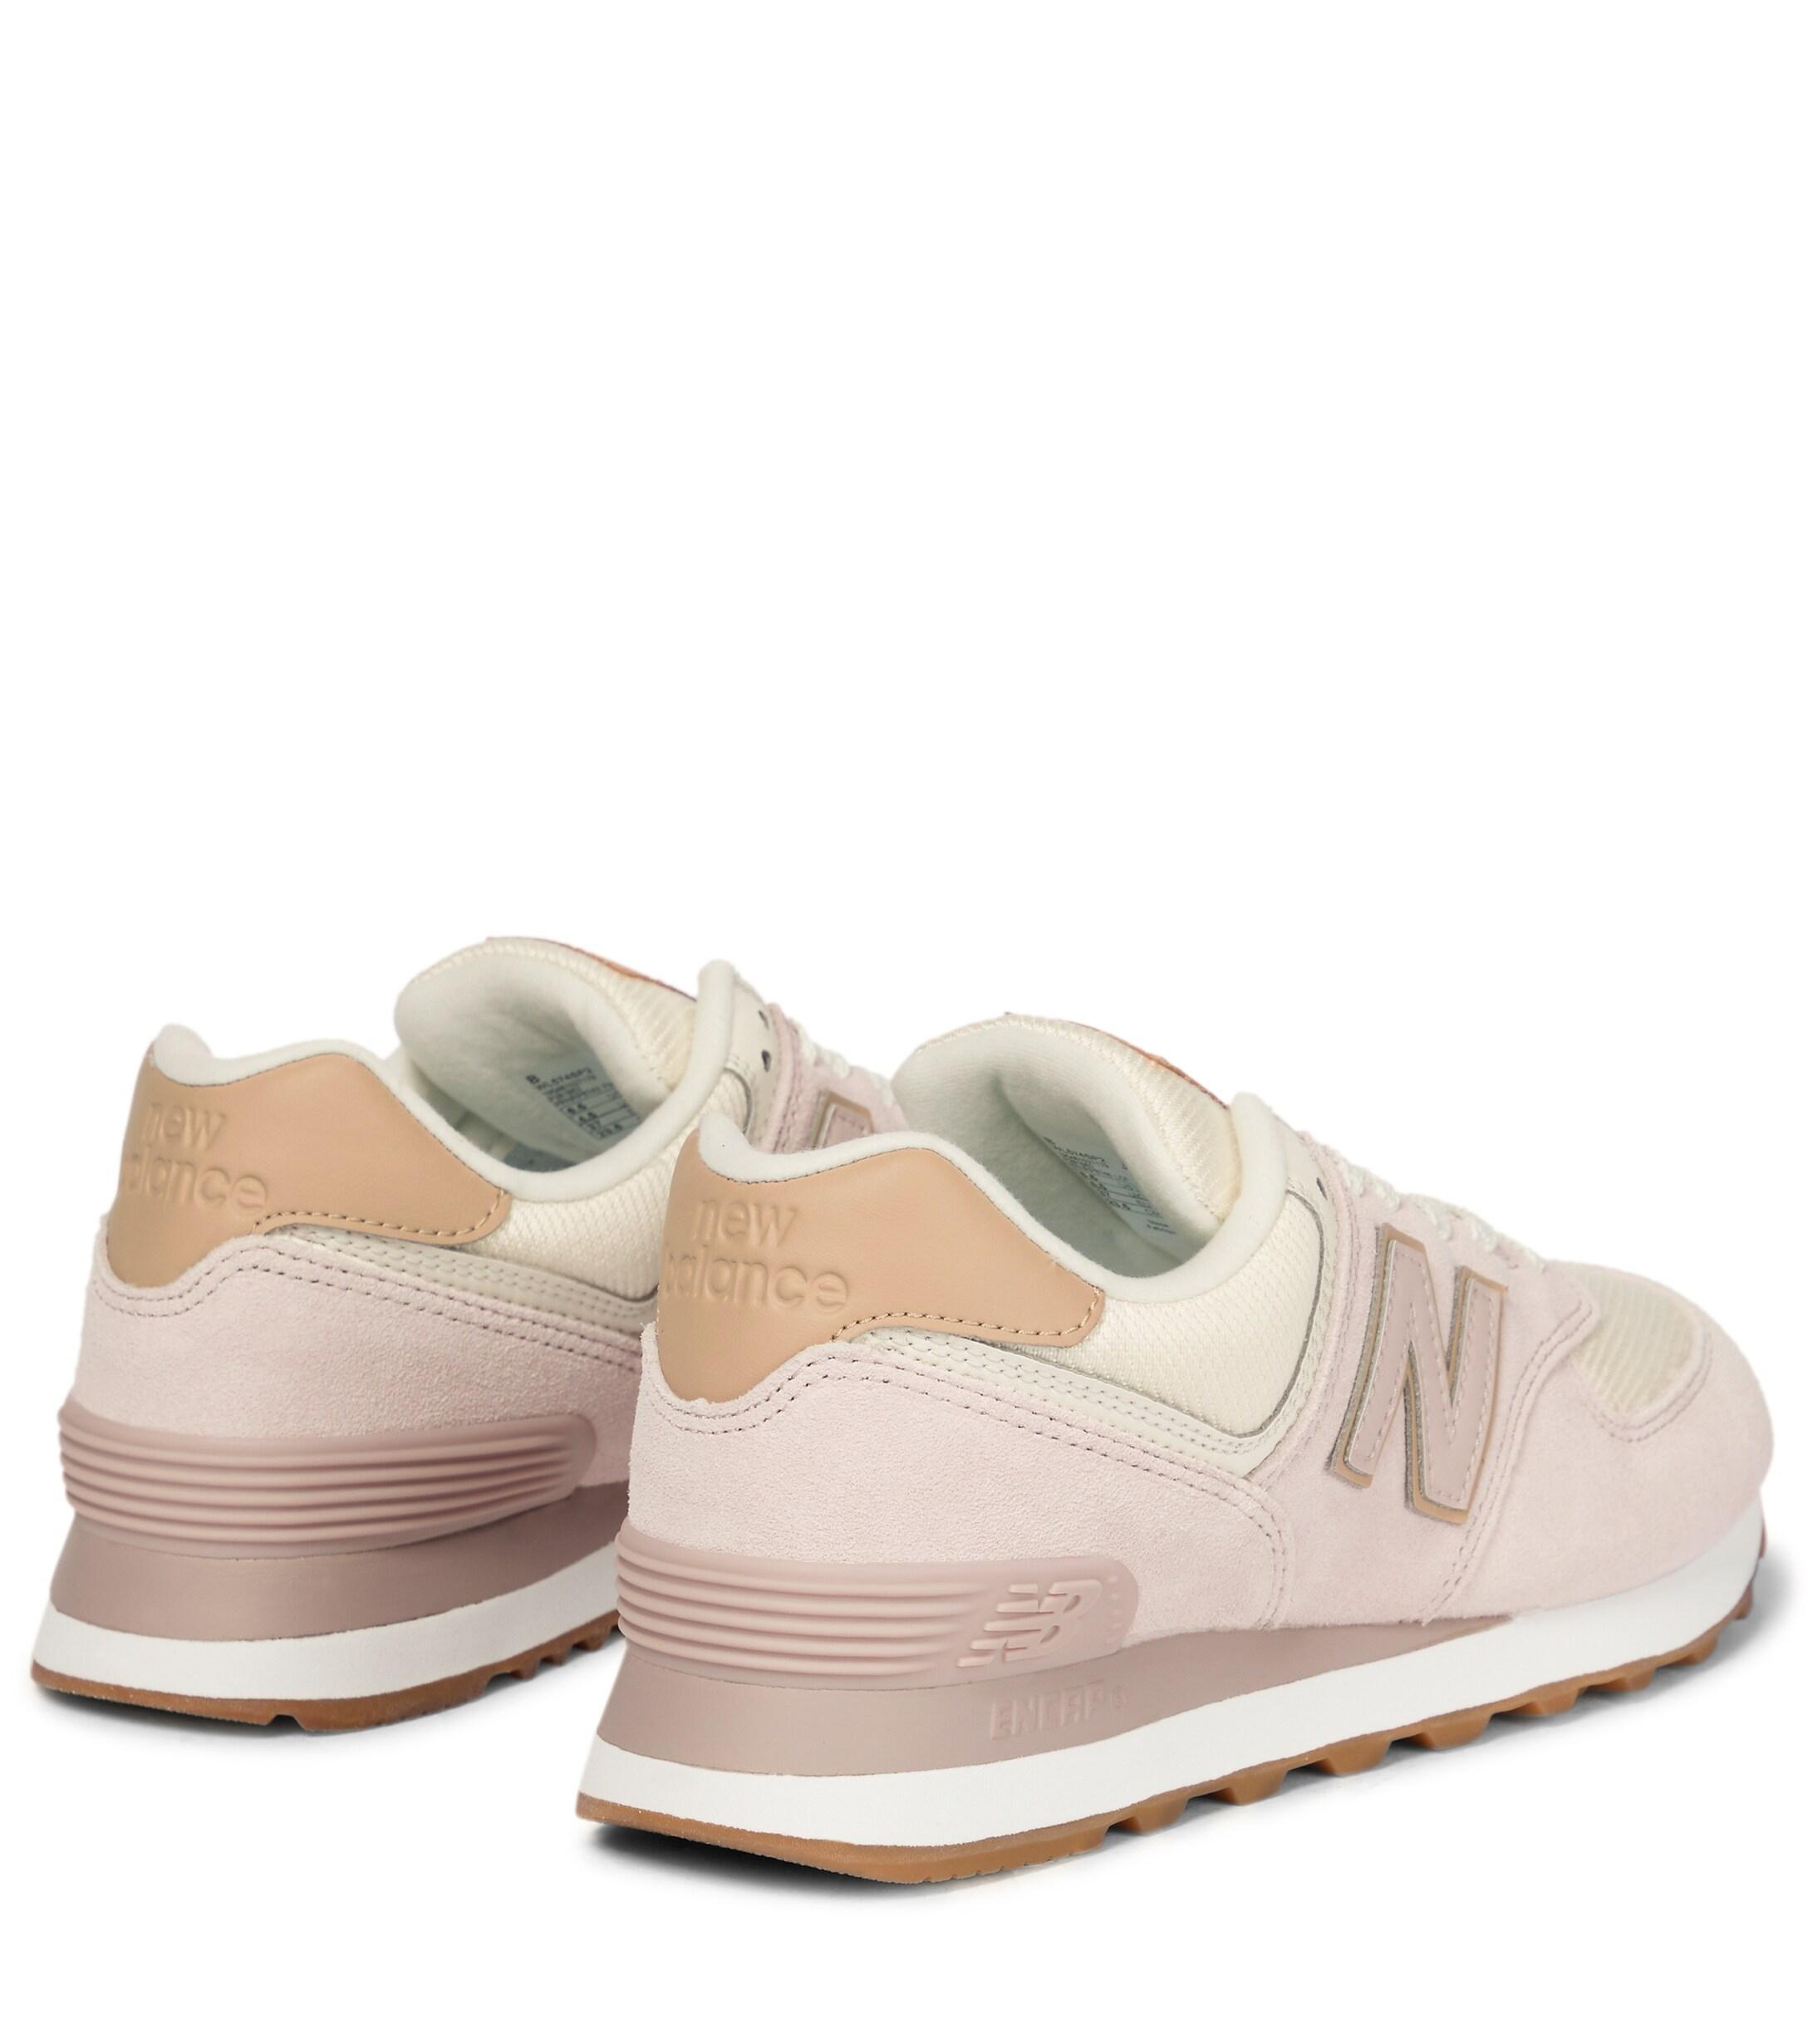 New Balance Leather X Reformation 574 Suede-trimmed Sneakers in Pink - Lyst